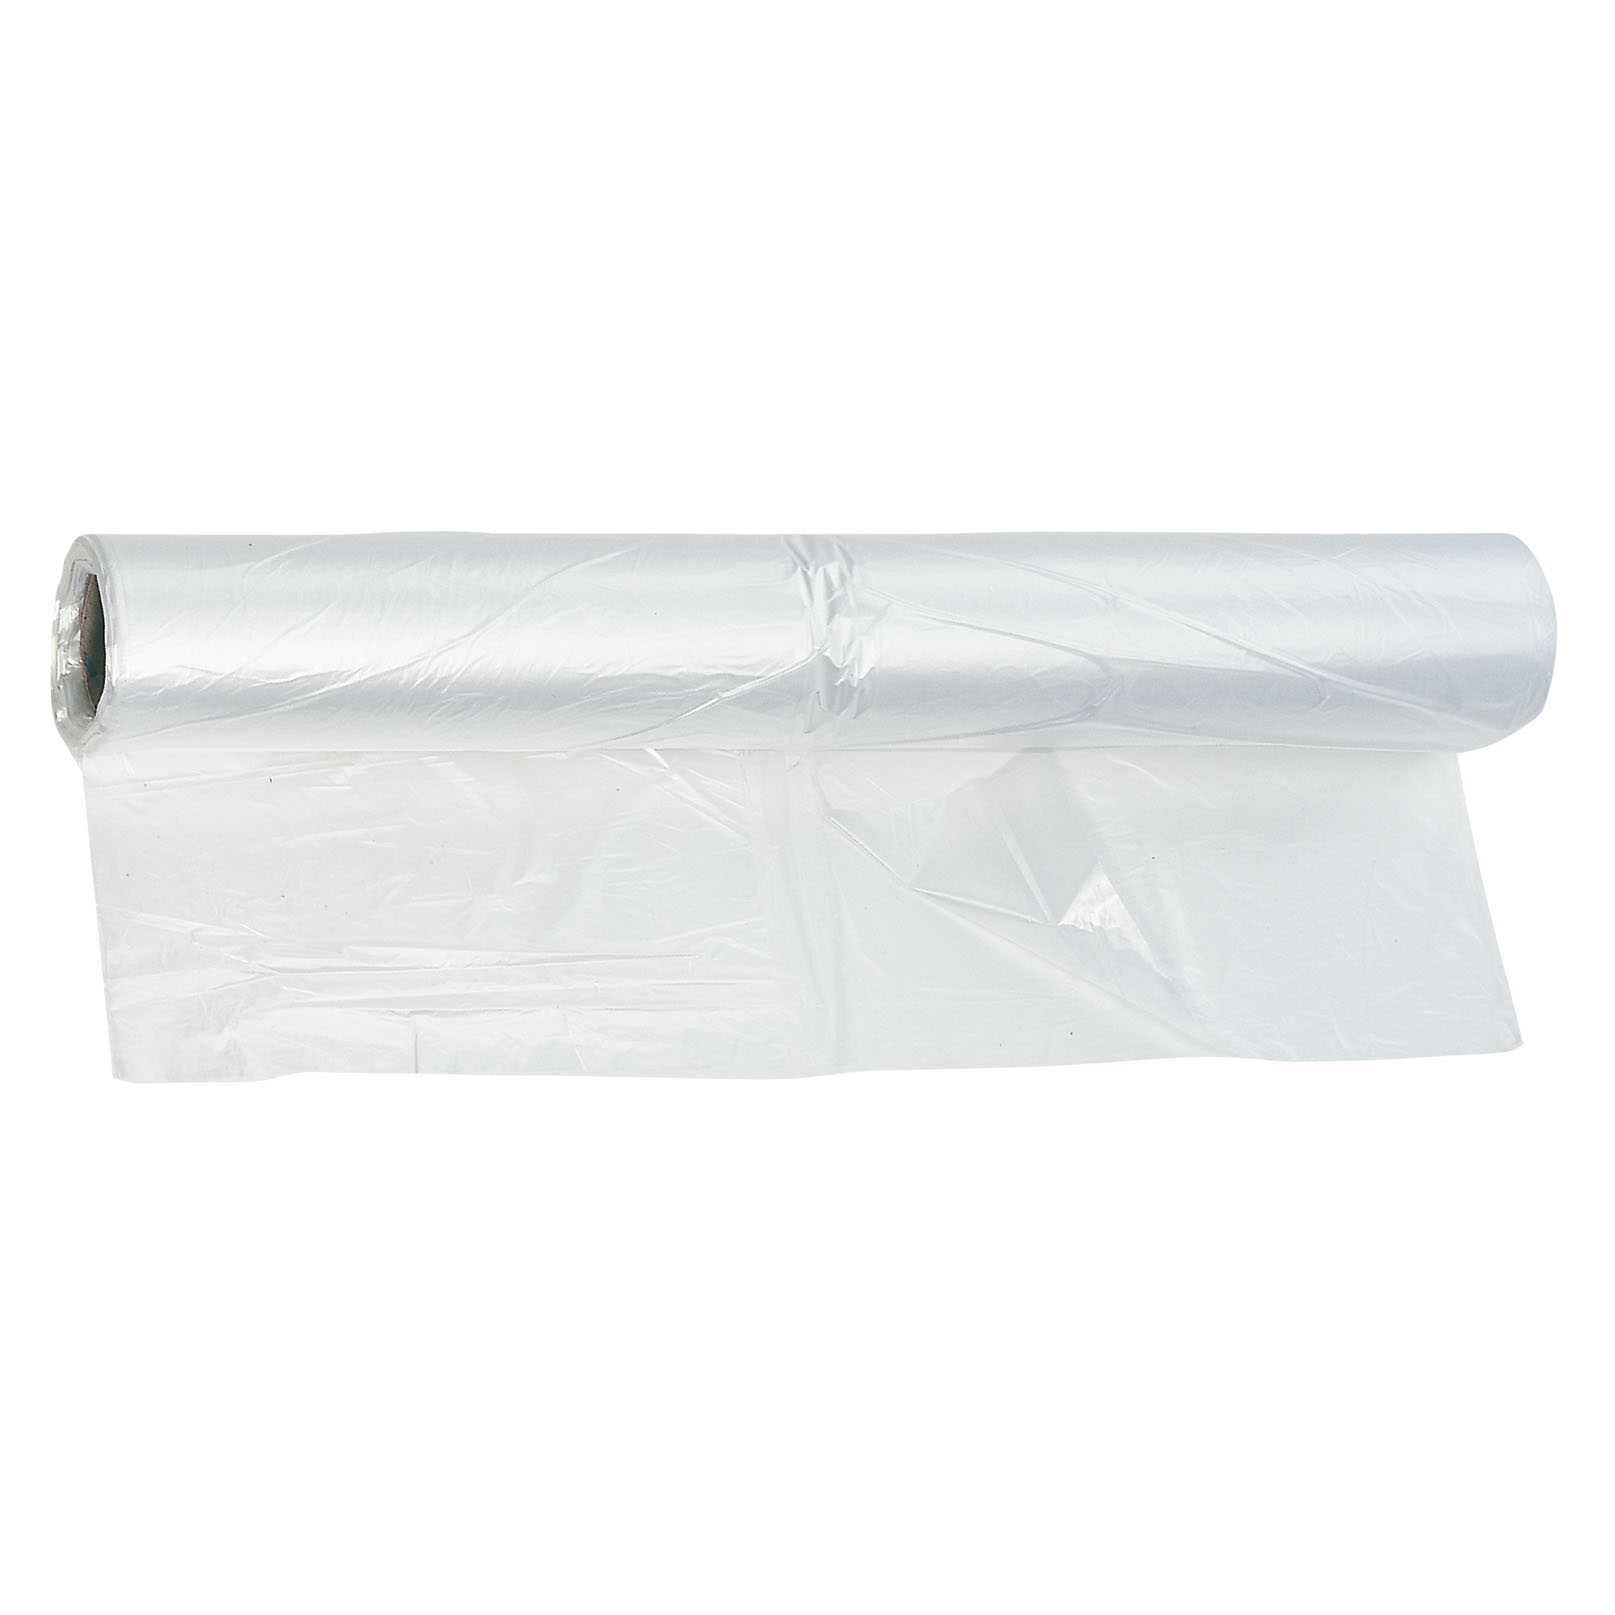 Storch Eco-LDPE Folie Strong Typ 50, 4 x 12,5 m